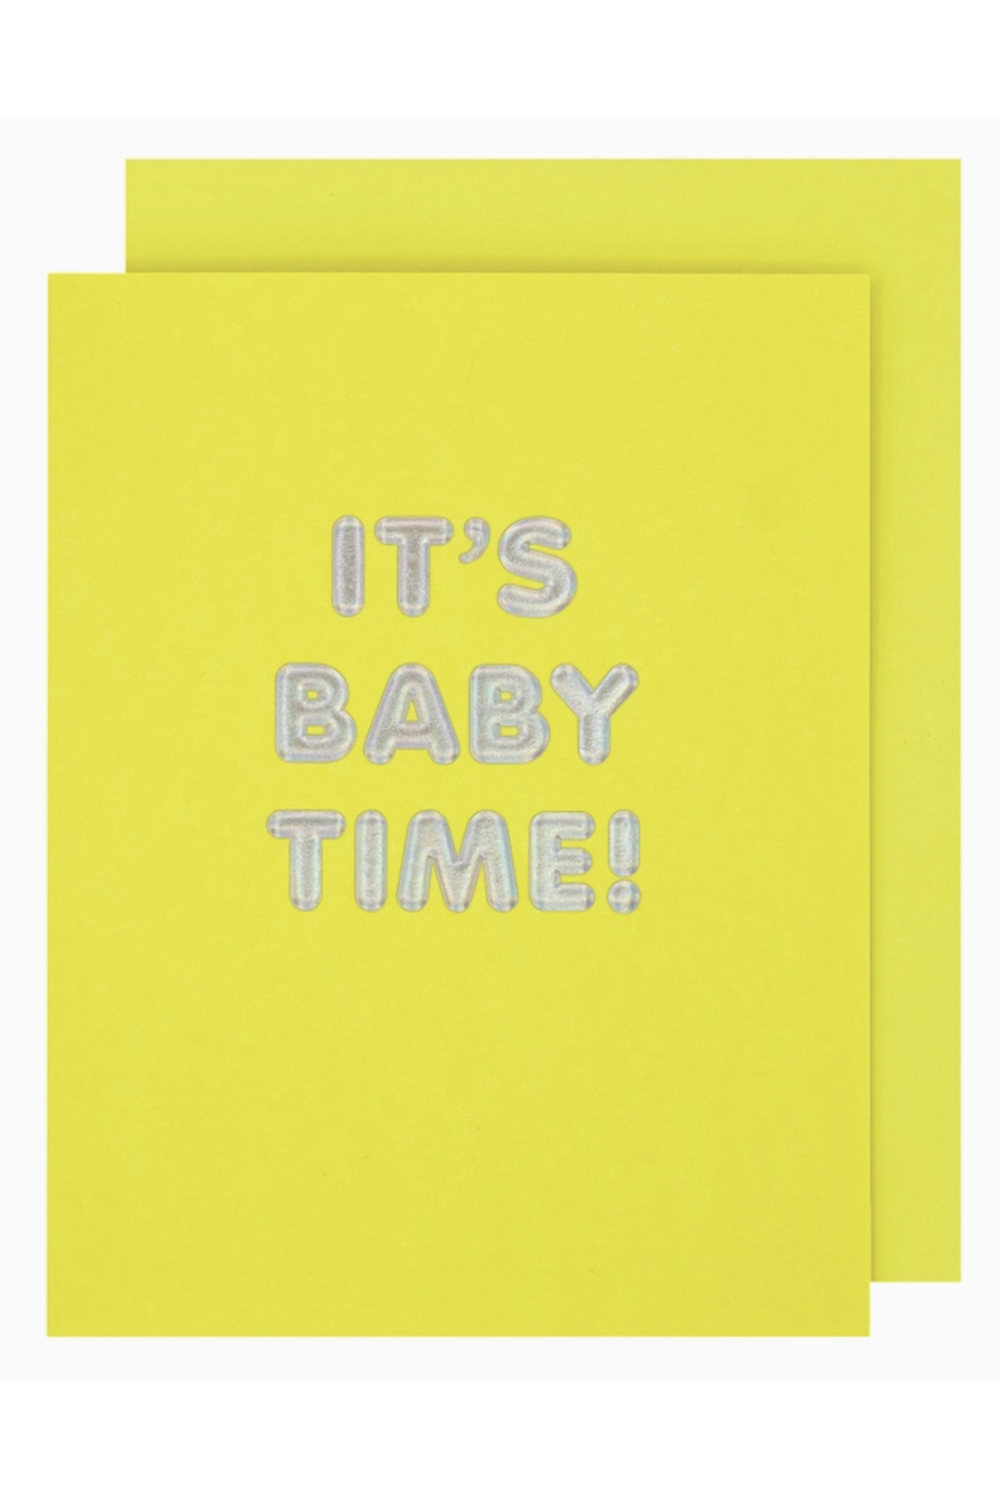 Social Baby Greeting Card - It's Baby Time